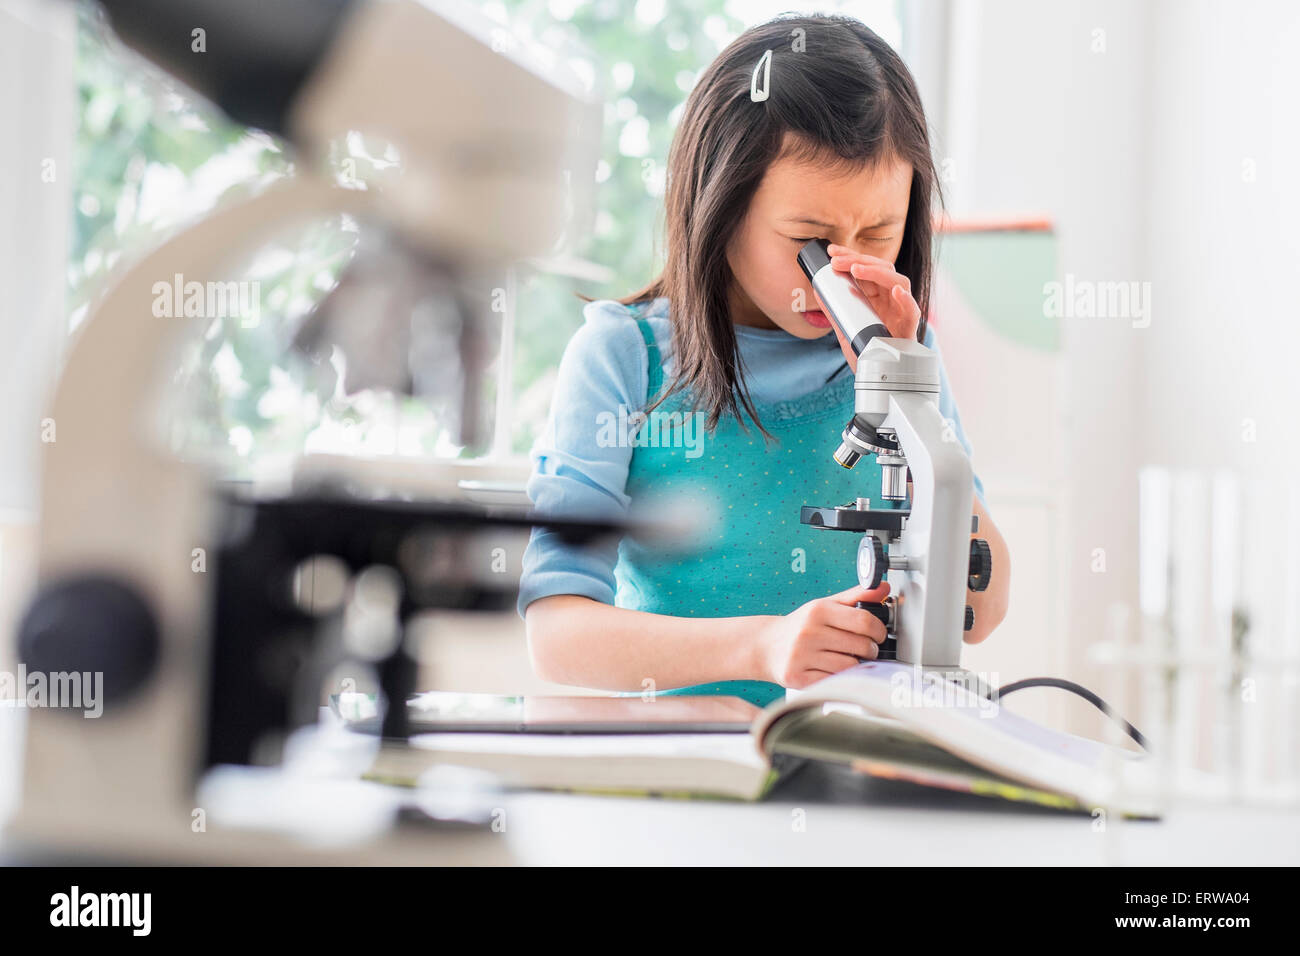 Chinese student using microscope in science lab Stock Photo